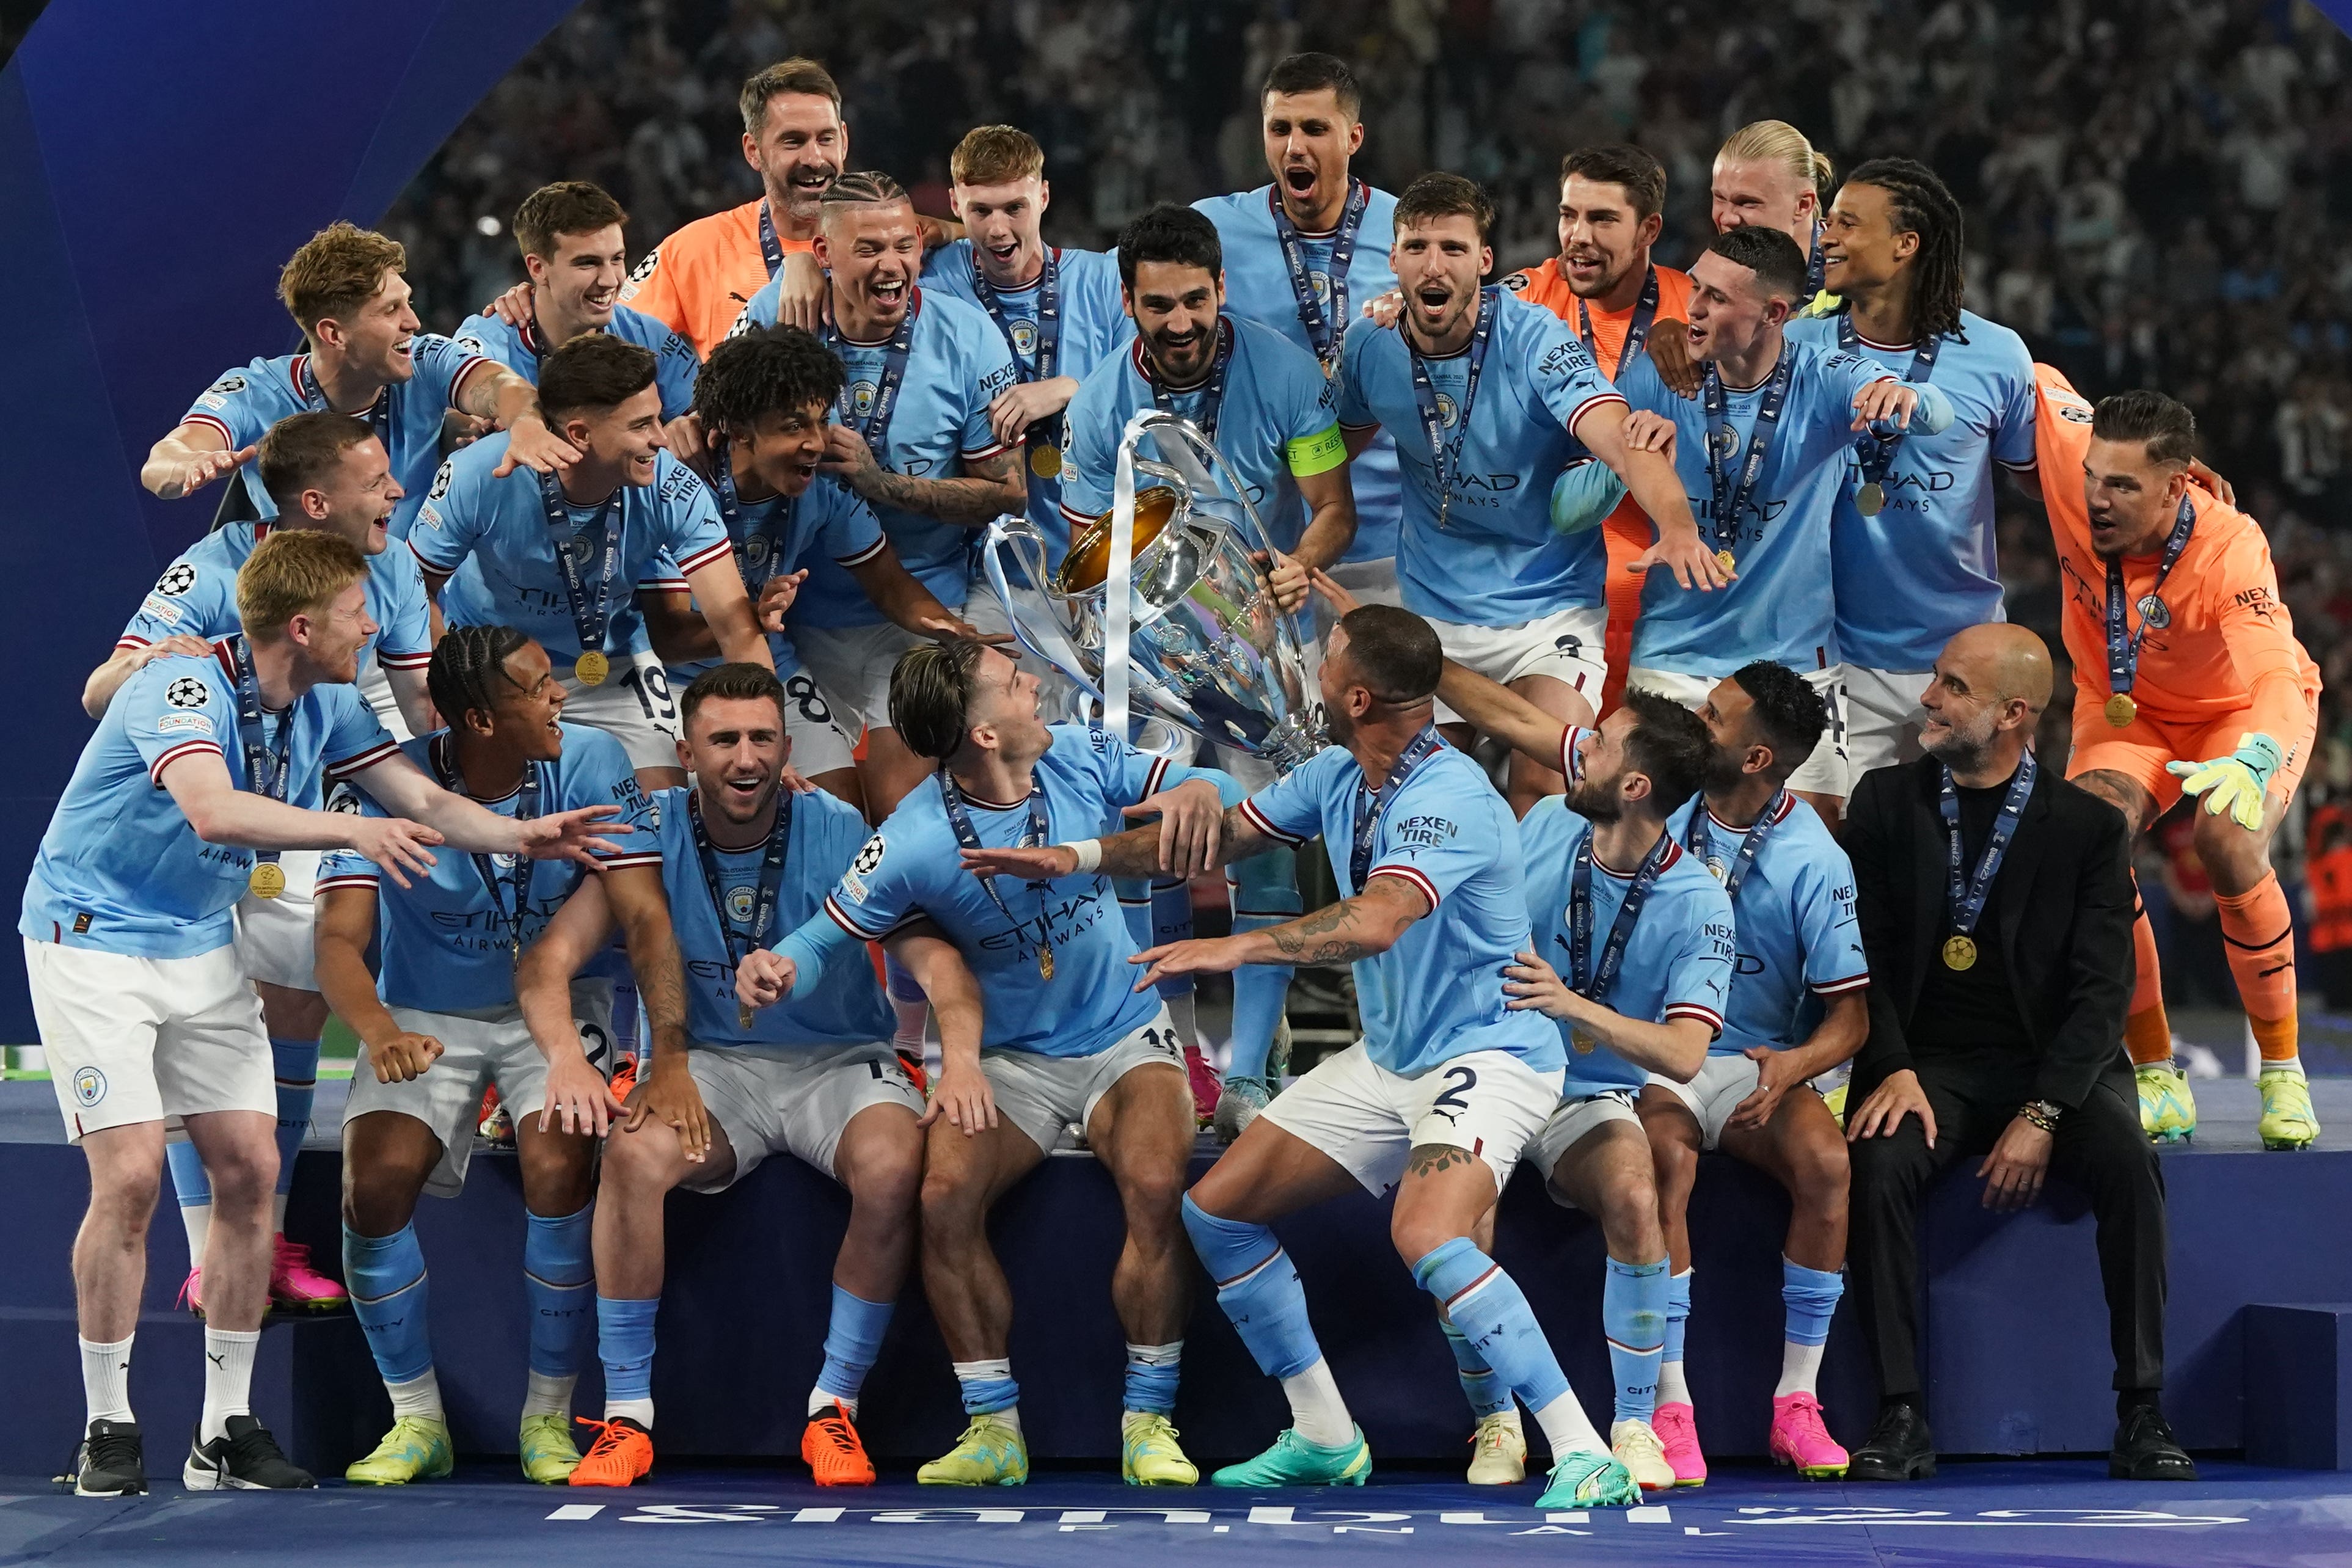 Man City reach the top of European football while fighting financial  charges